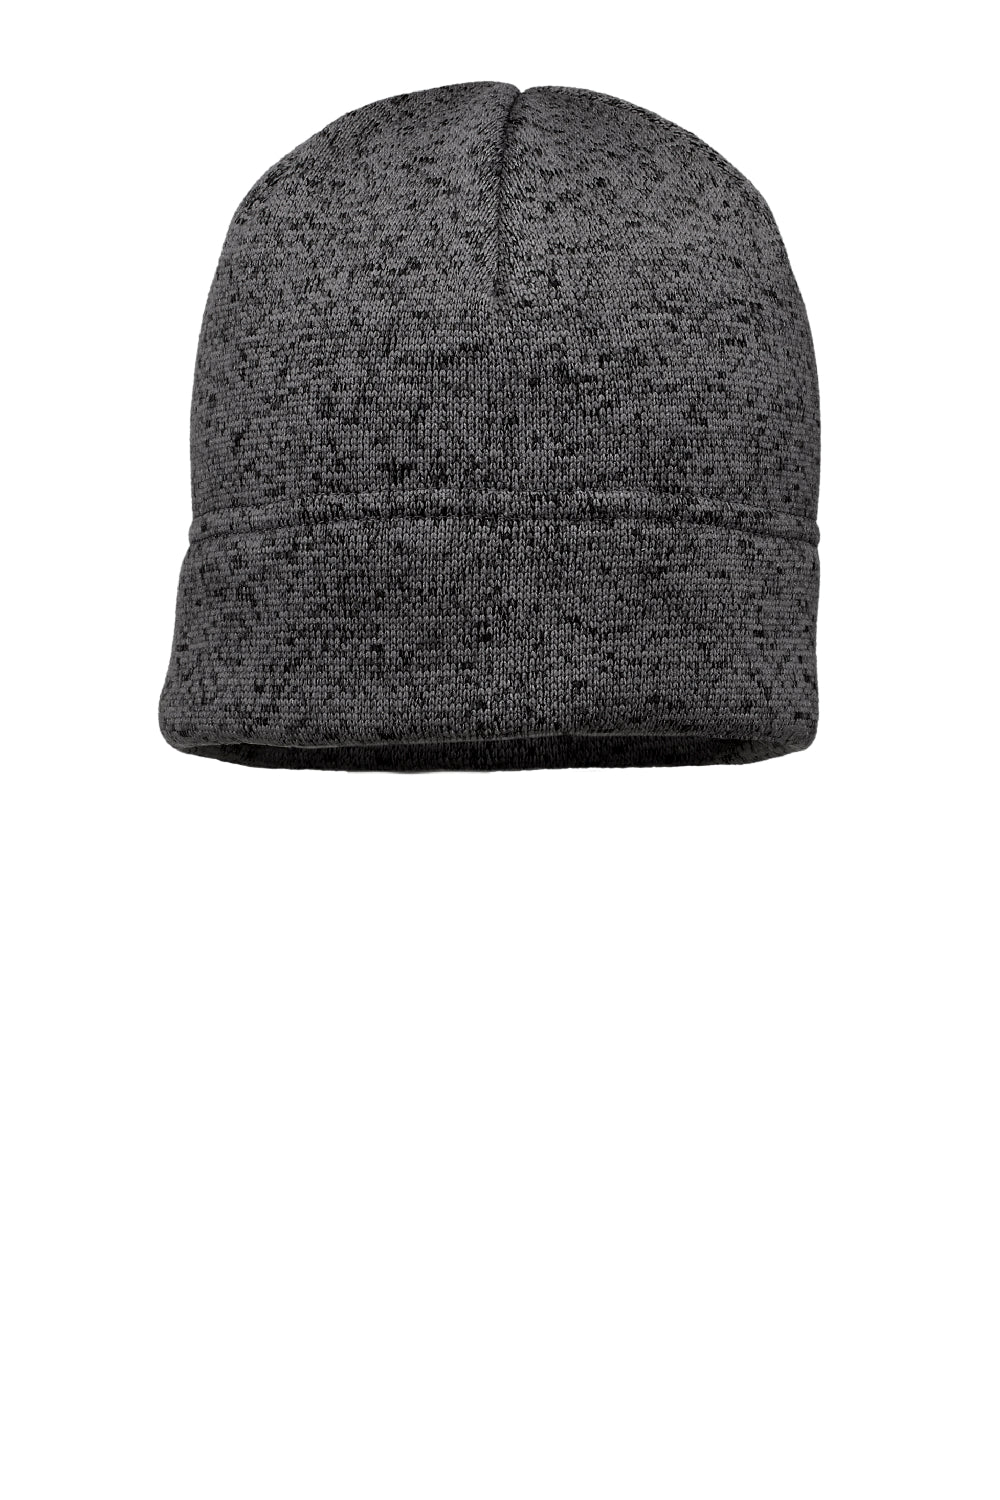 Port Authority C917 Heathered Knit Beanie Heather Black/Charcoal Grey Front